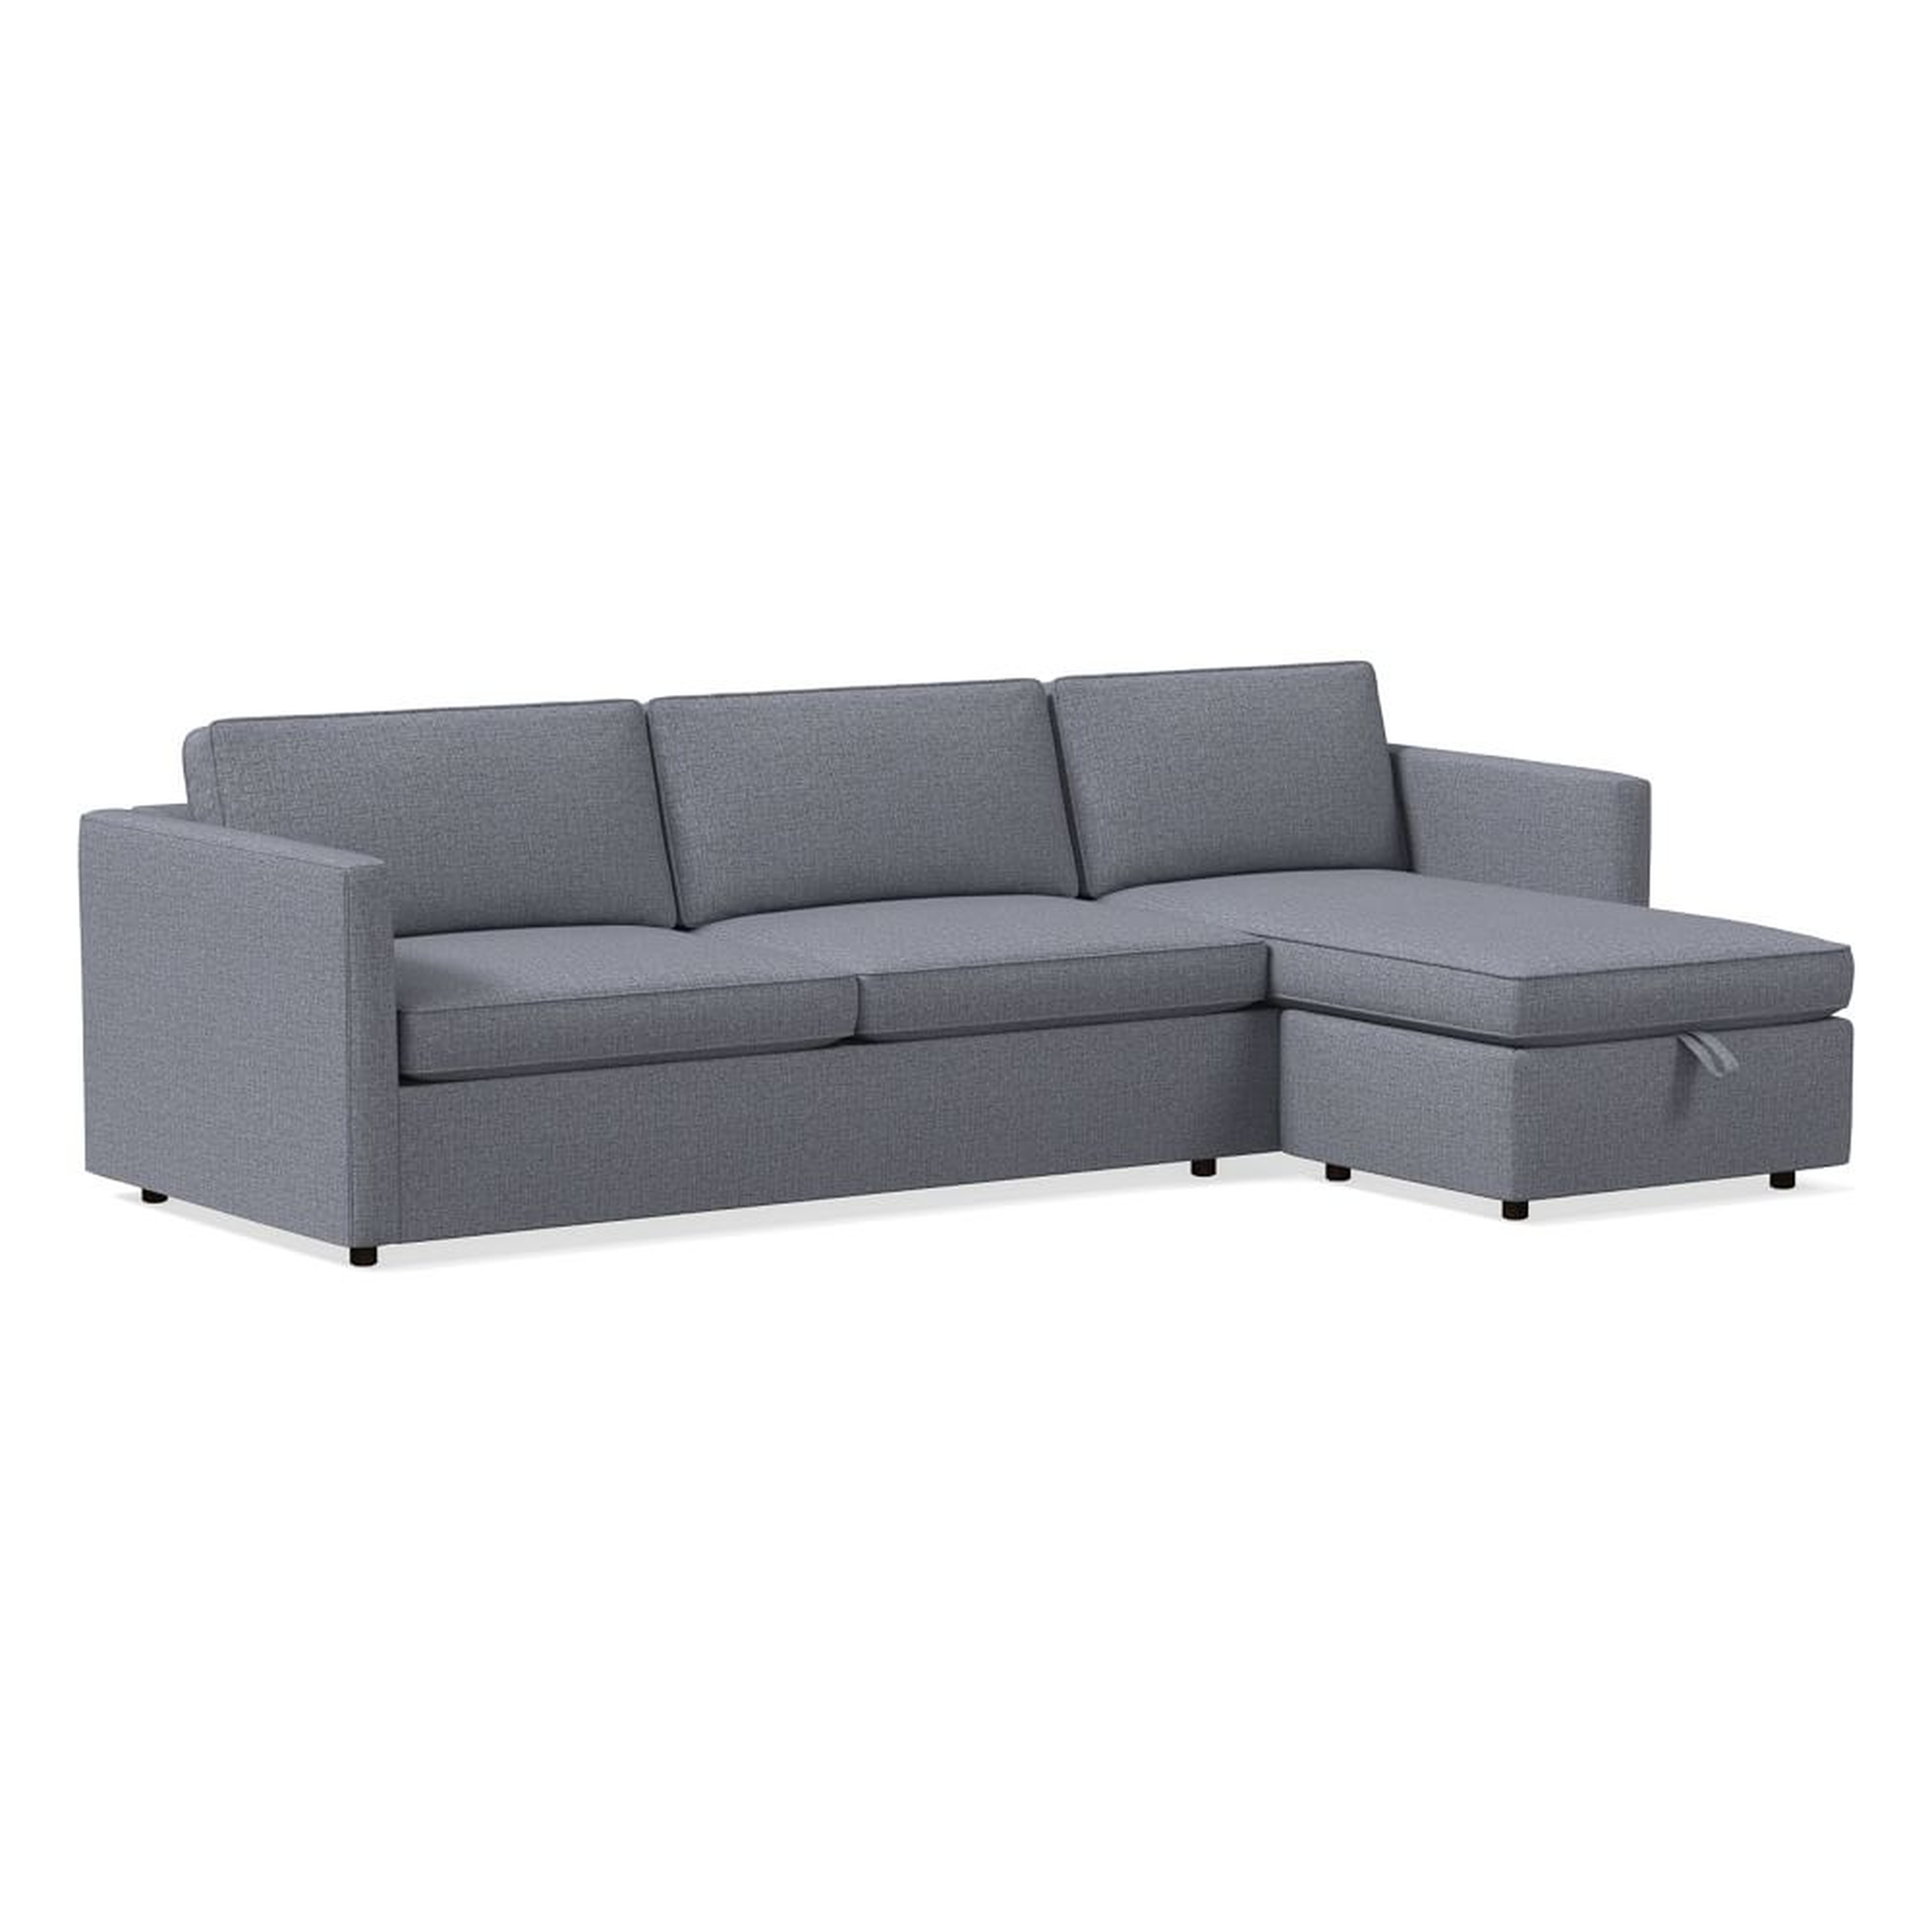 Harris Flip Sectional, Poly, Yarn Dyed Linen Weave, Graphite, Concealed Supports - West Elm